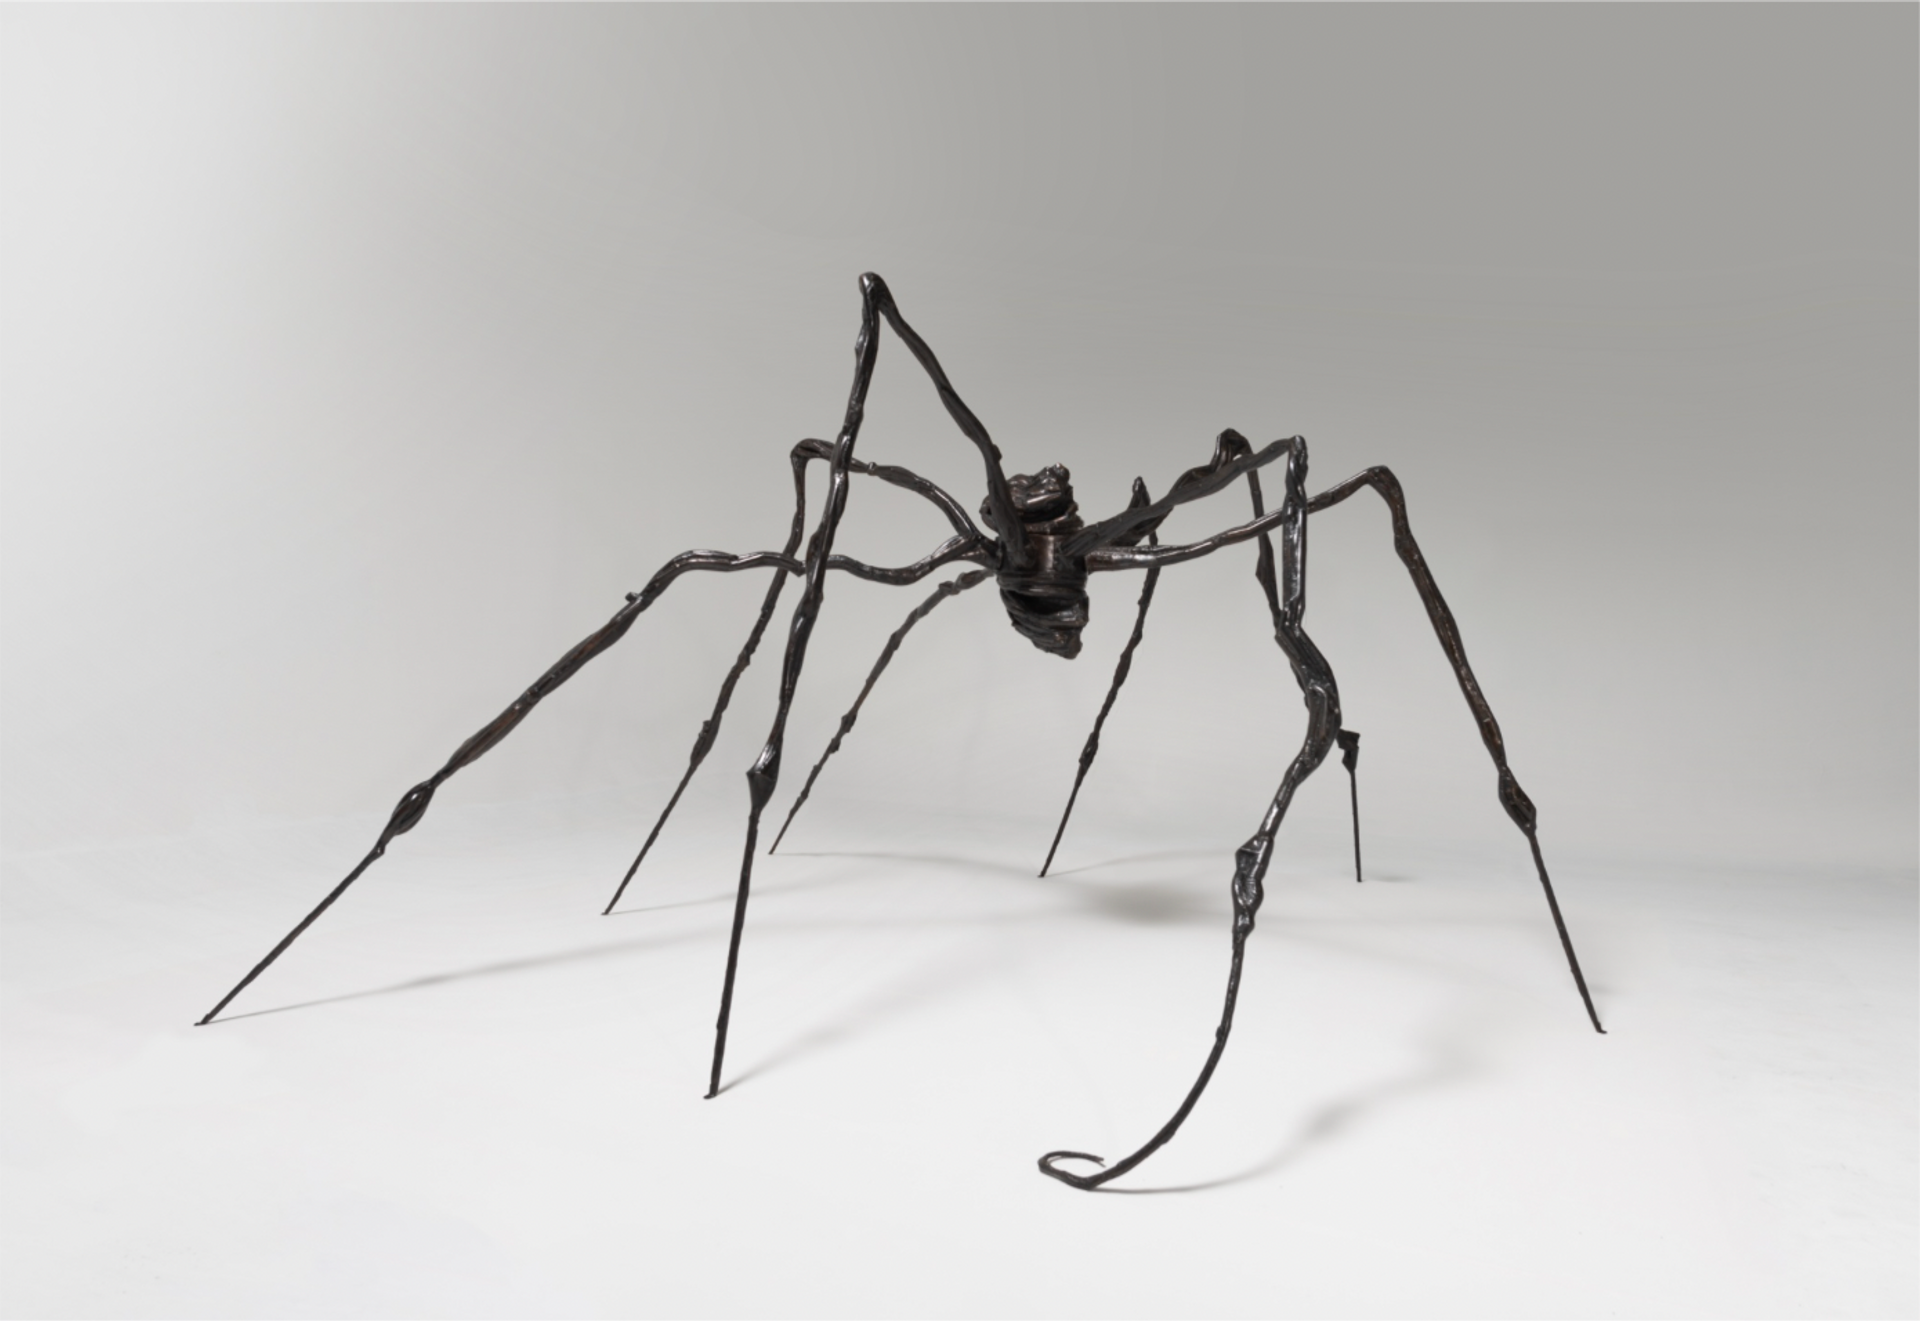 Large-scale bronze casted sculpture by Louise Bourgeois of a towering spider.